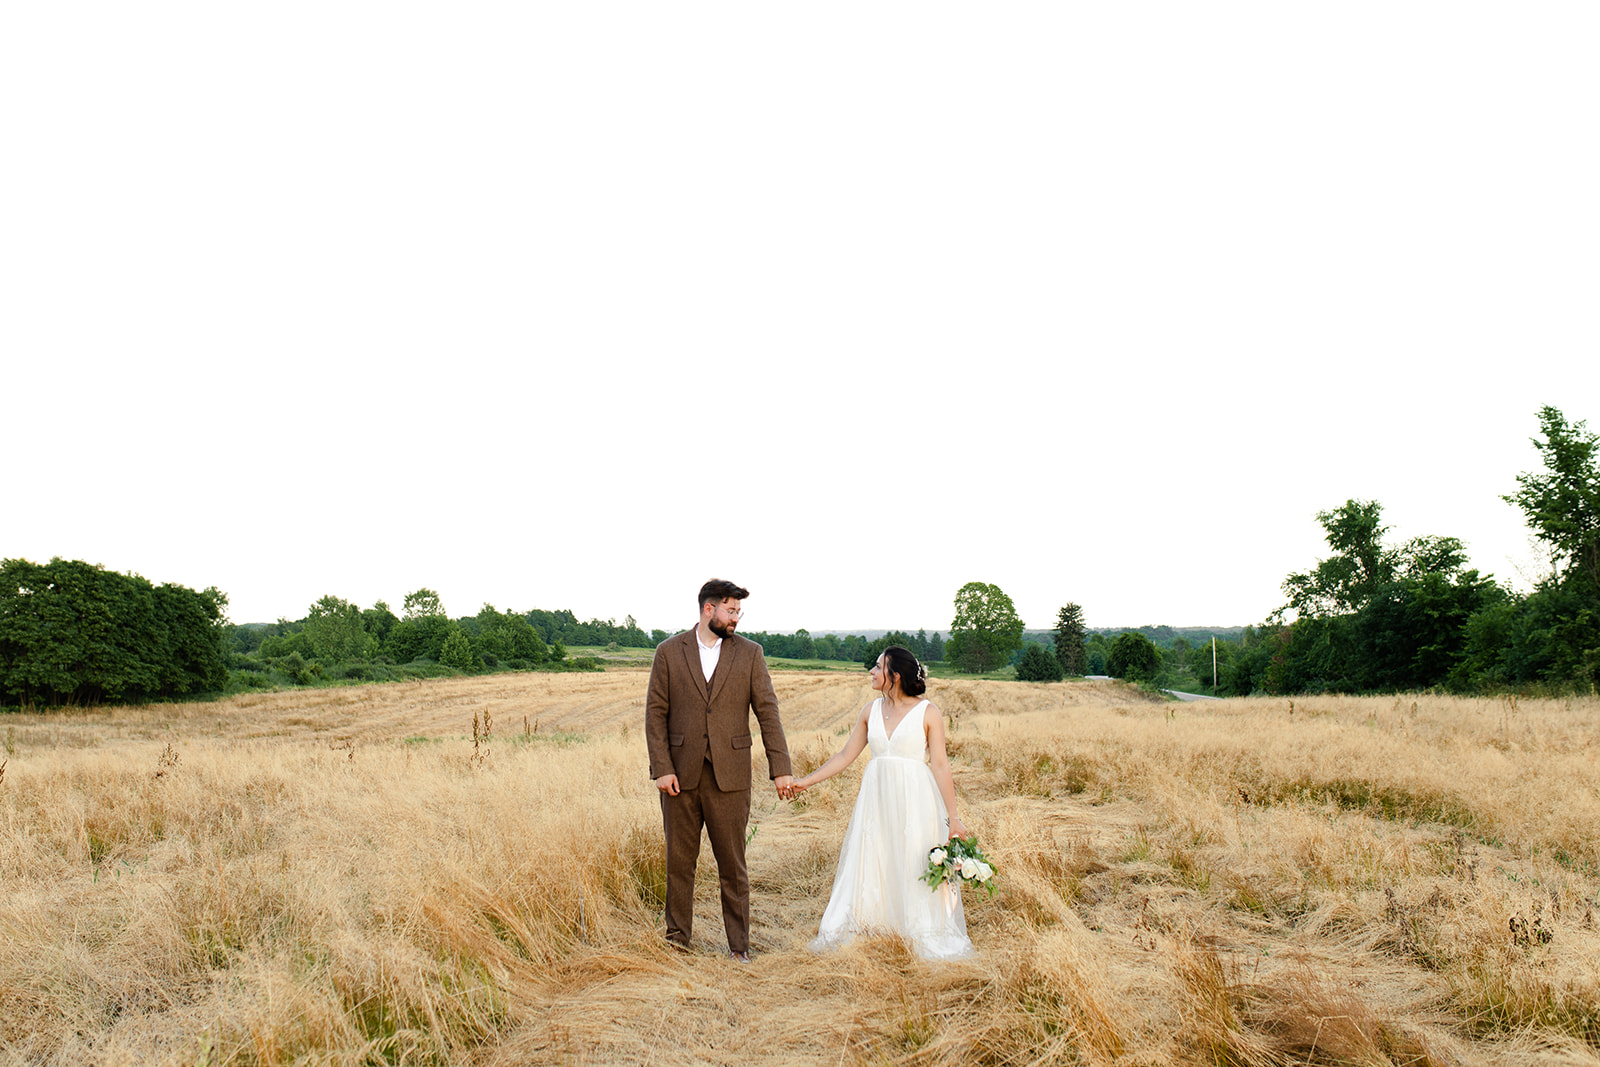 Majestic wedding photos in a wheat field during a beautiful Ohio sunset